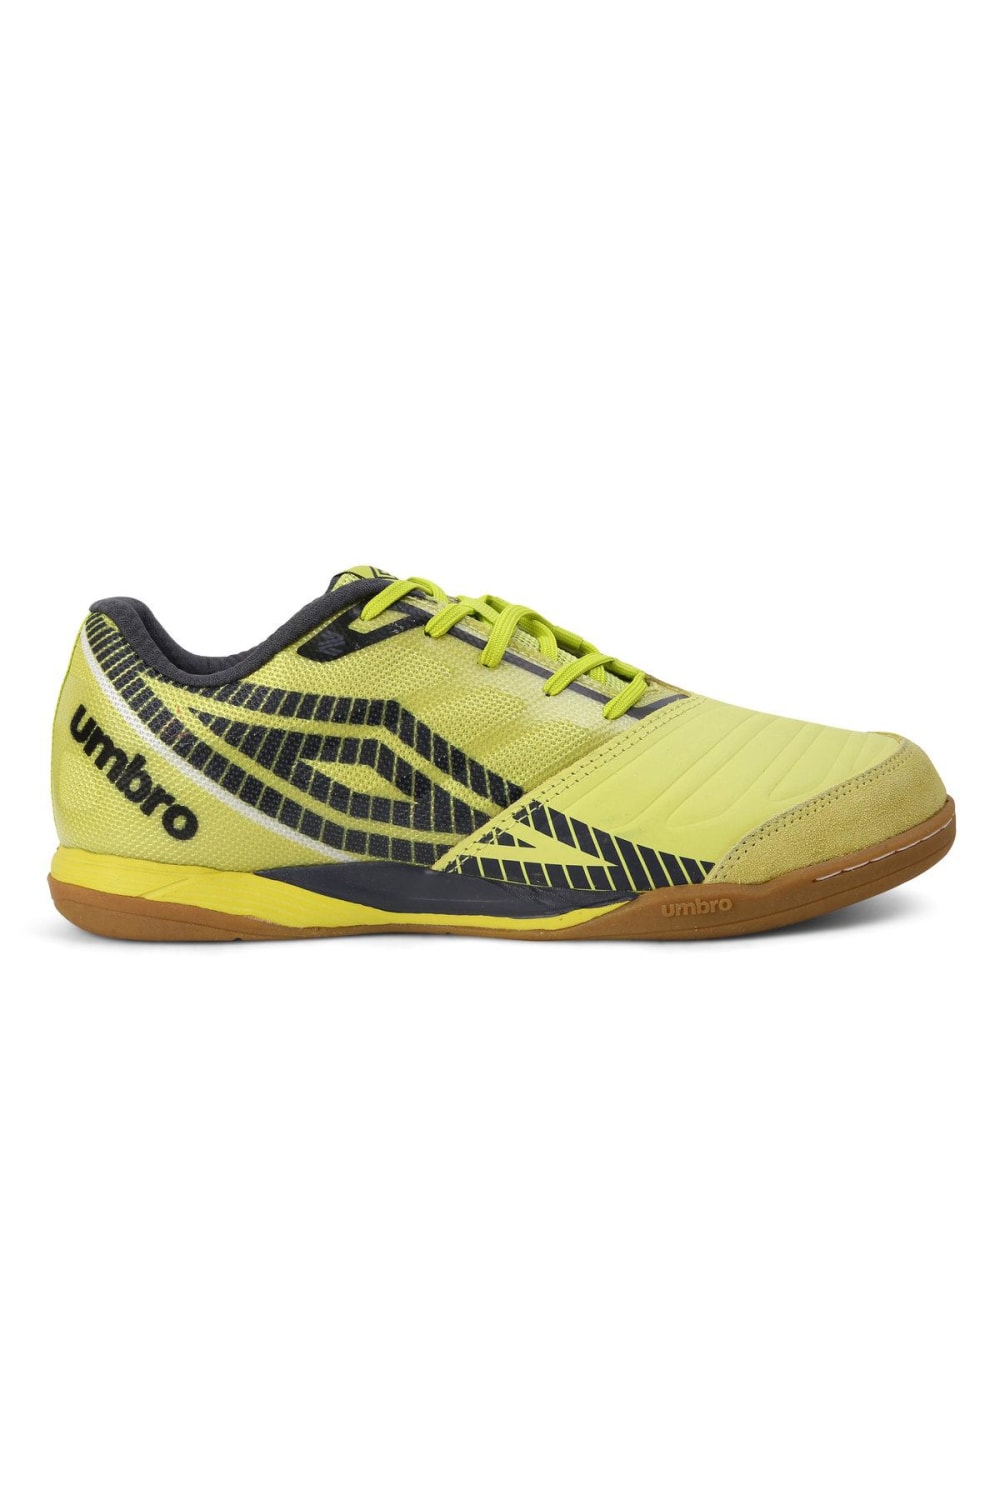 Mens Sala Brz Pro Leather Sneakers - Limeade Yellow